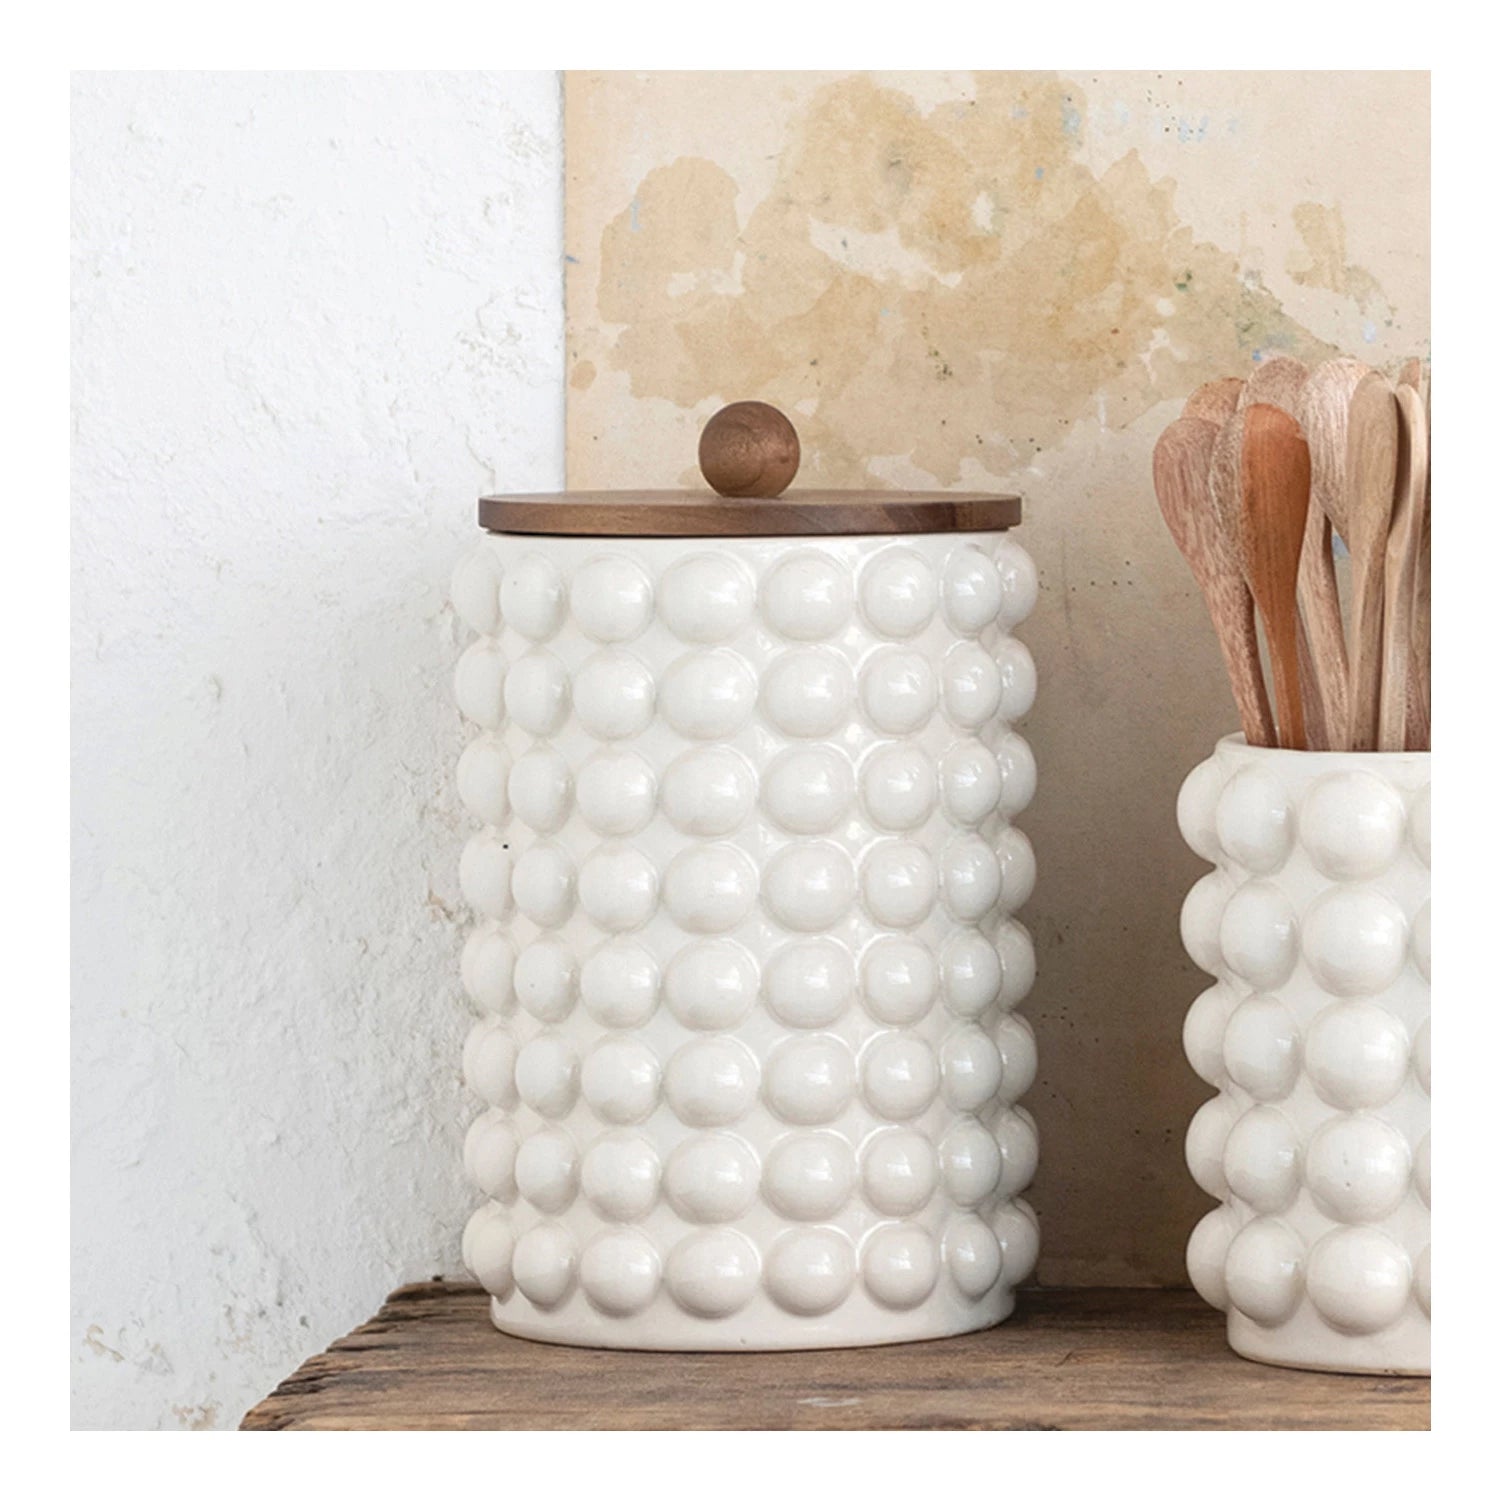 Tall Cream Canister with Dots